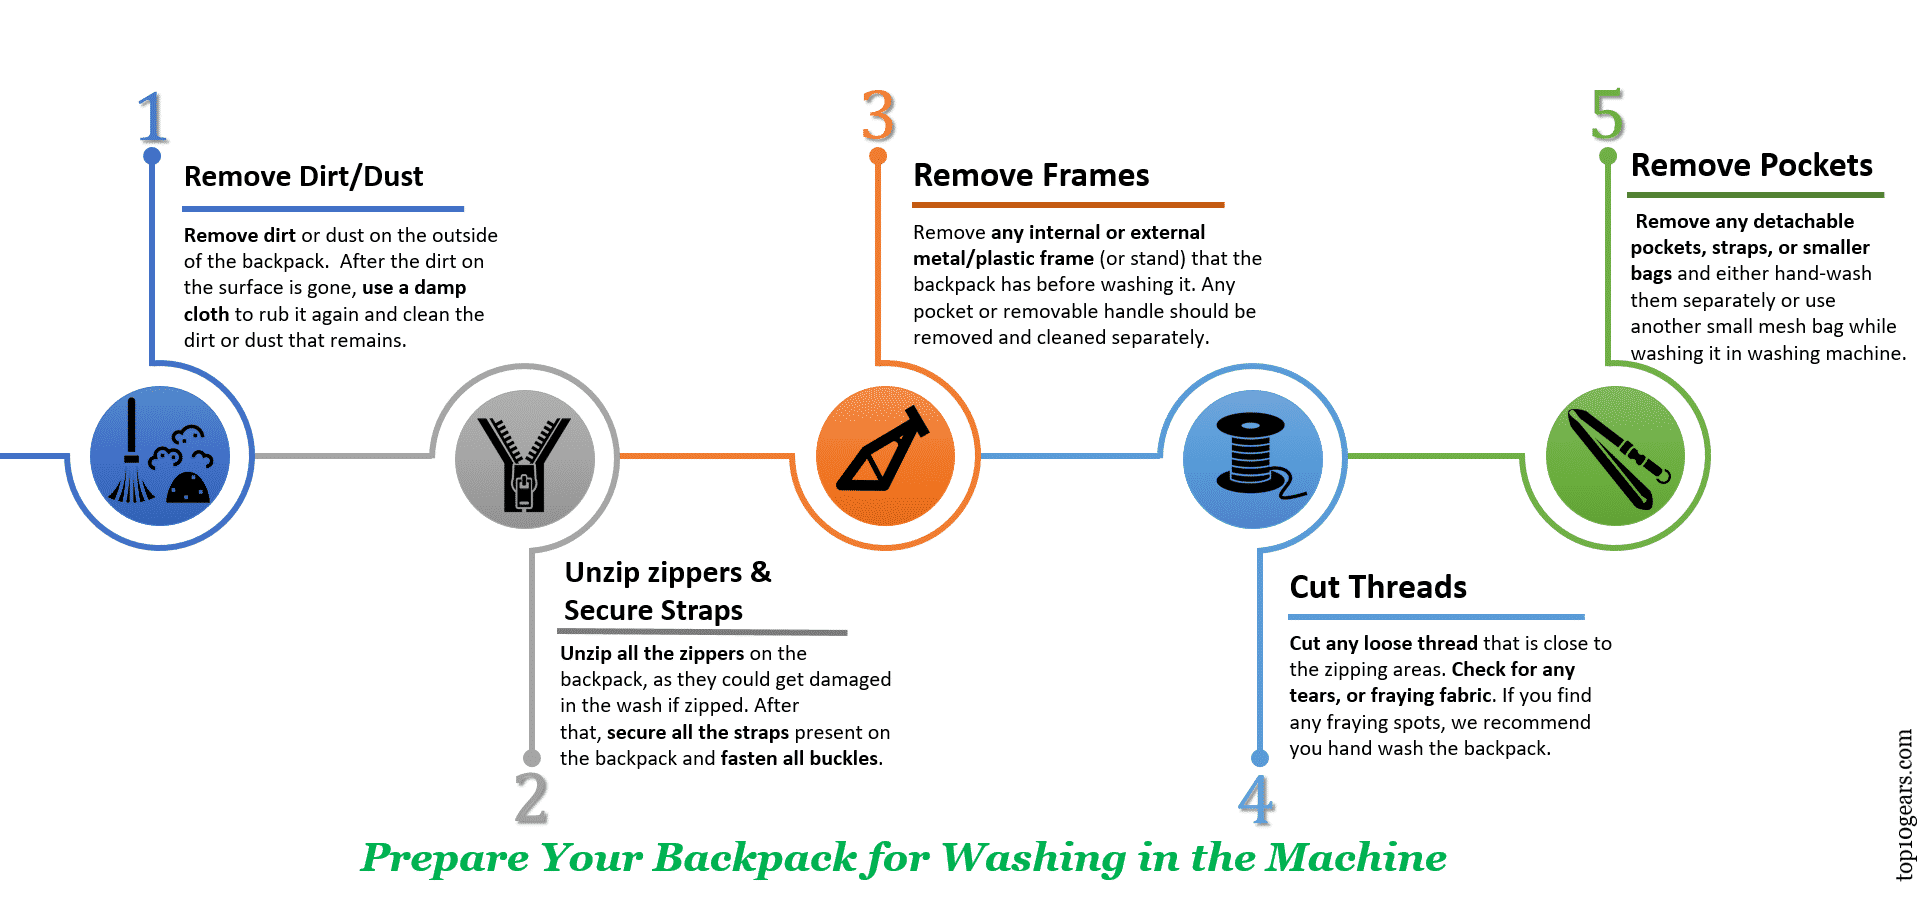 Prepare Your Backpack for Washing in the Machine